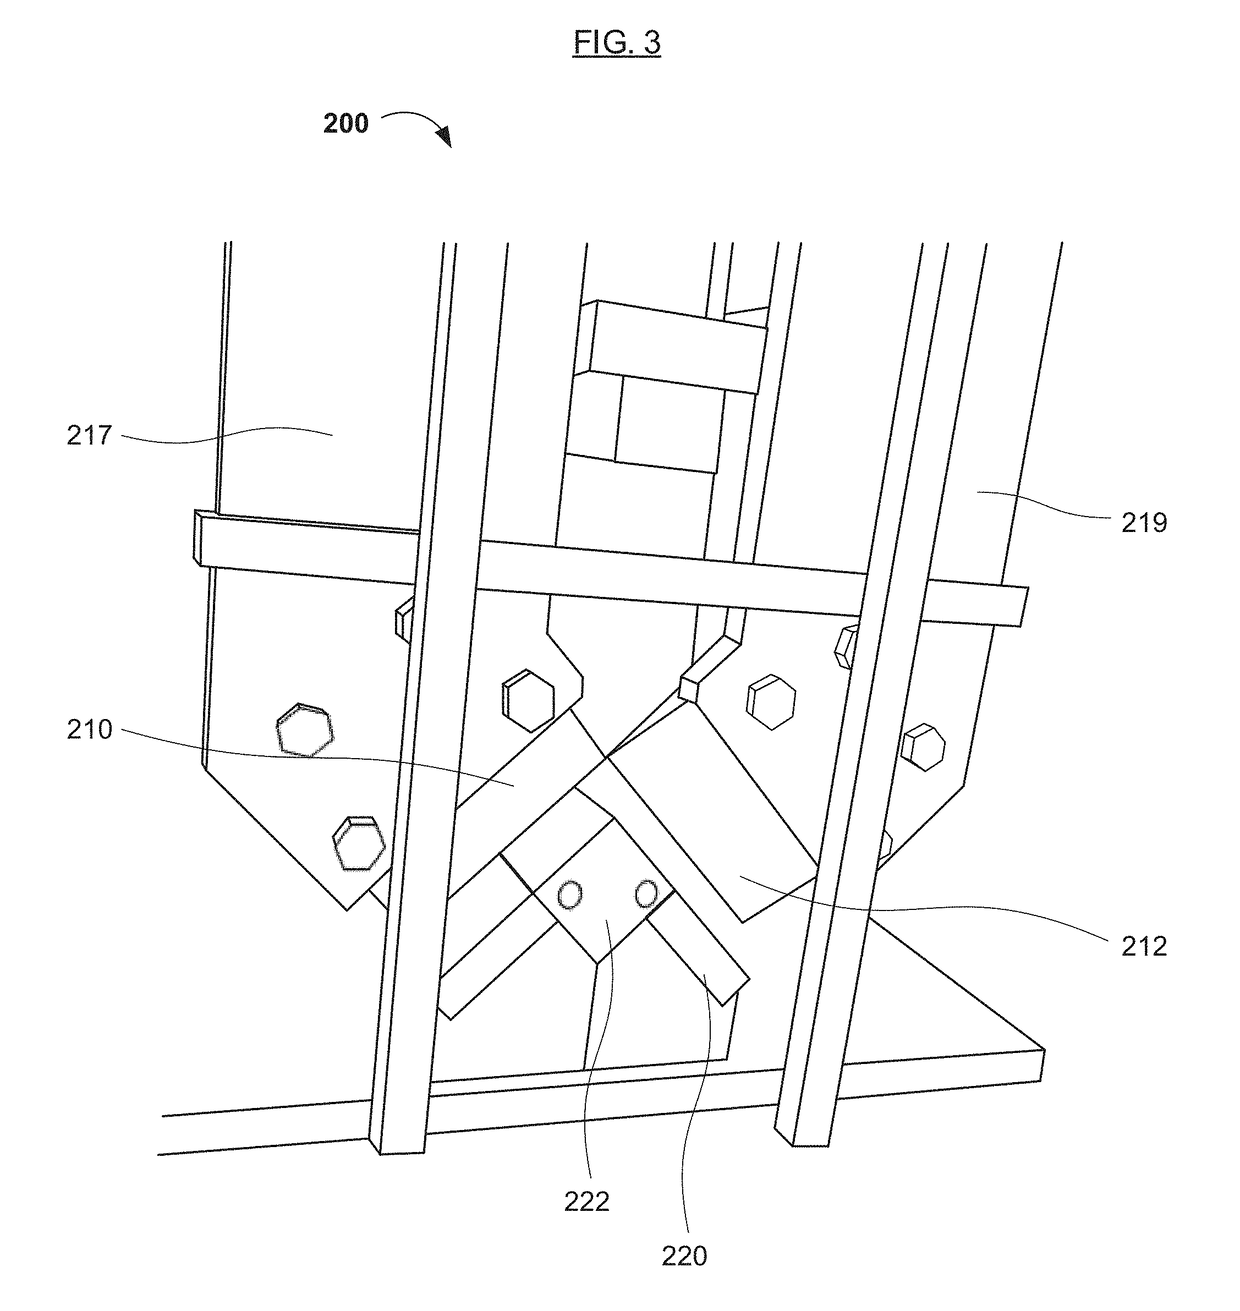 Apparatus and Method for Making Corner Boards for Container Assemblies